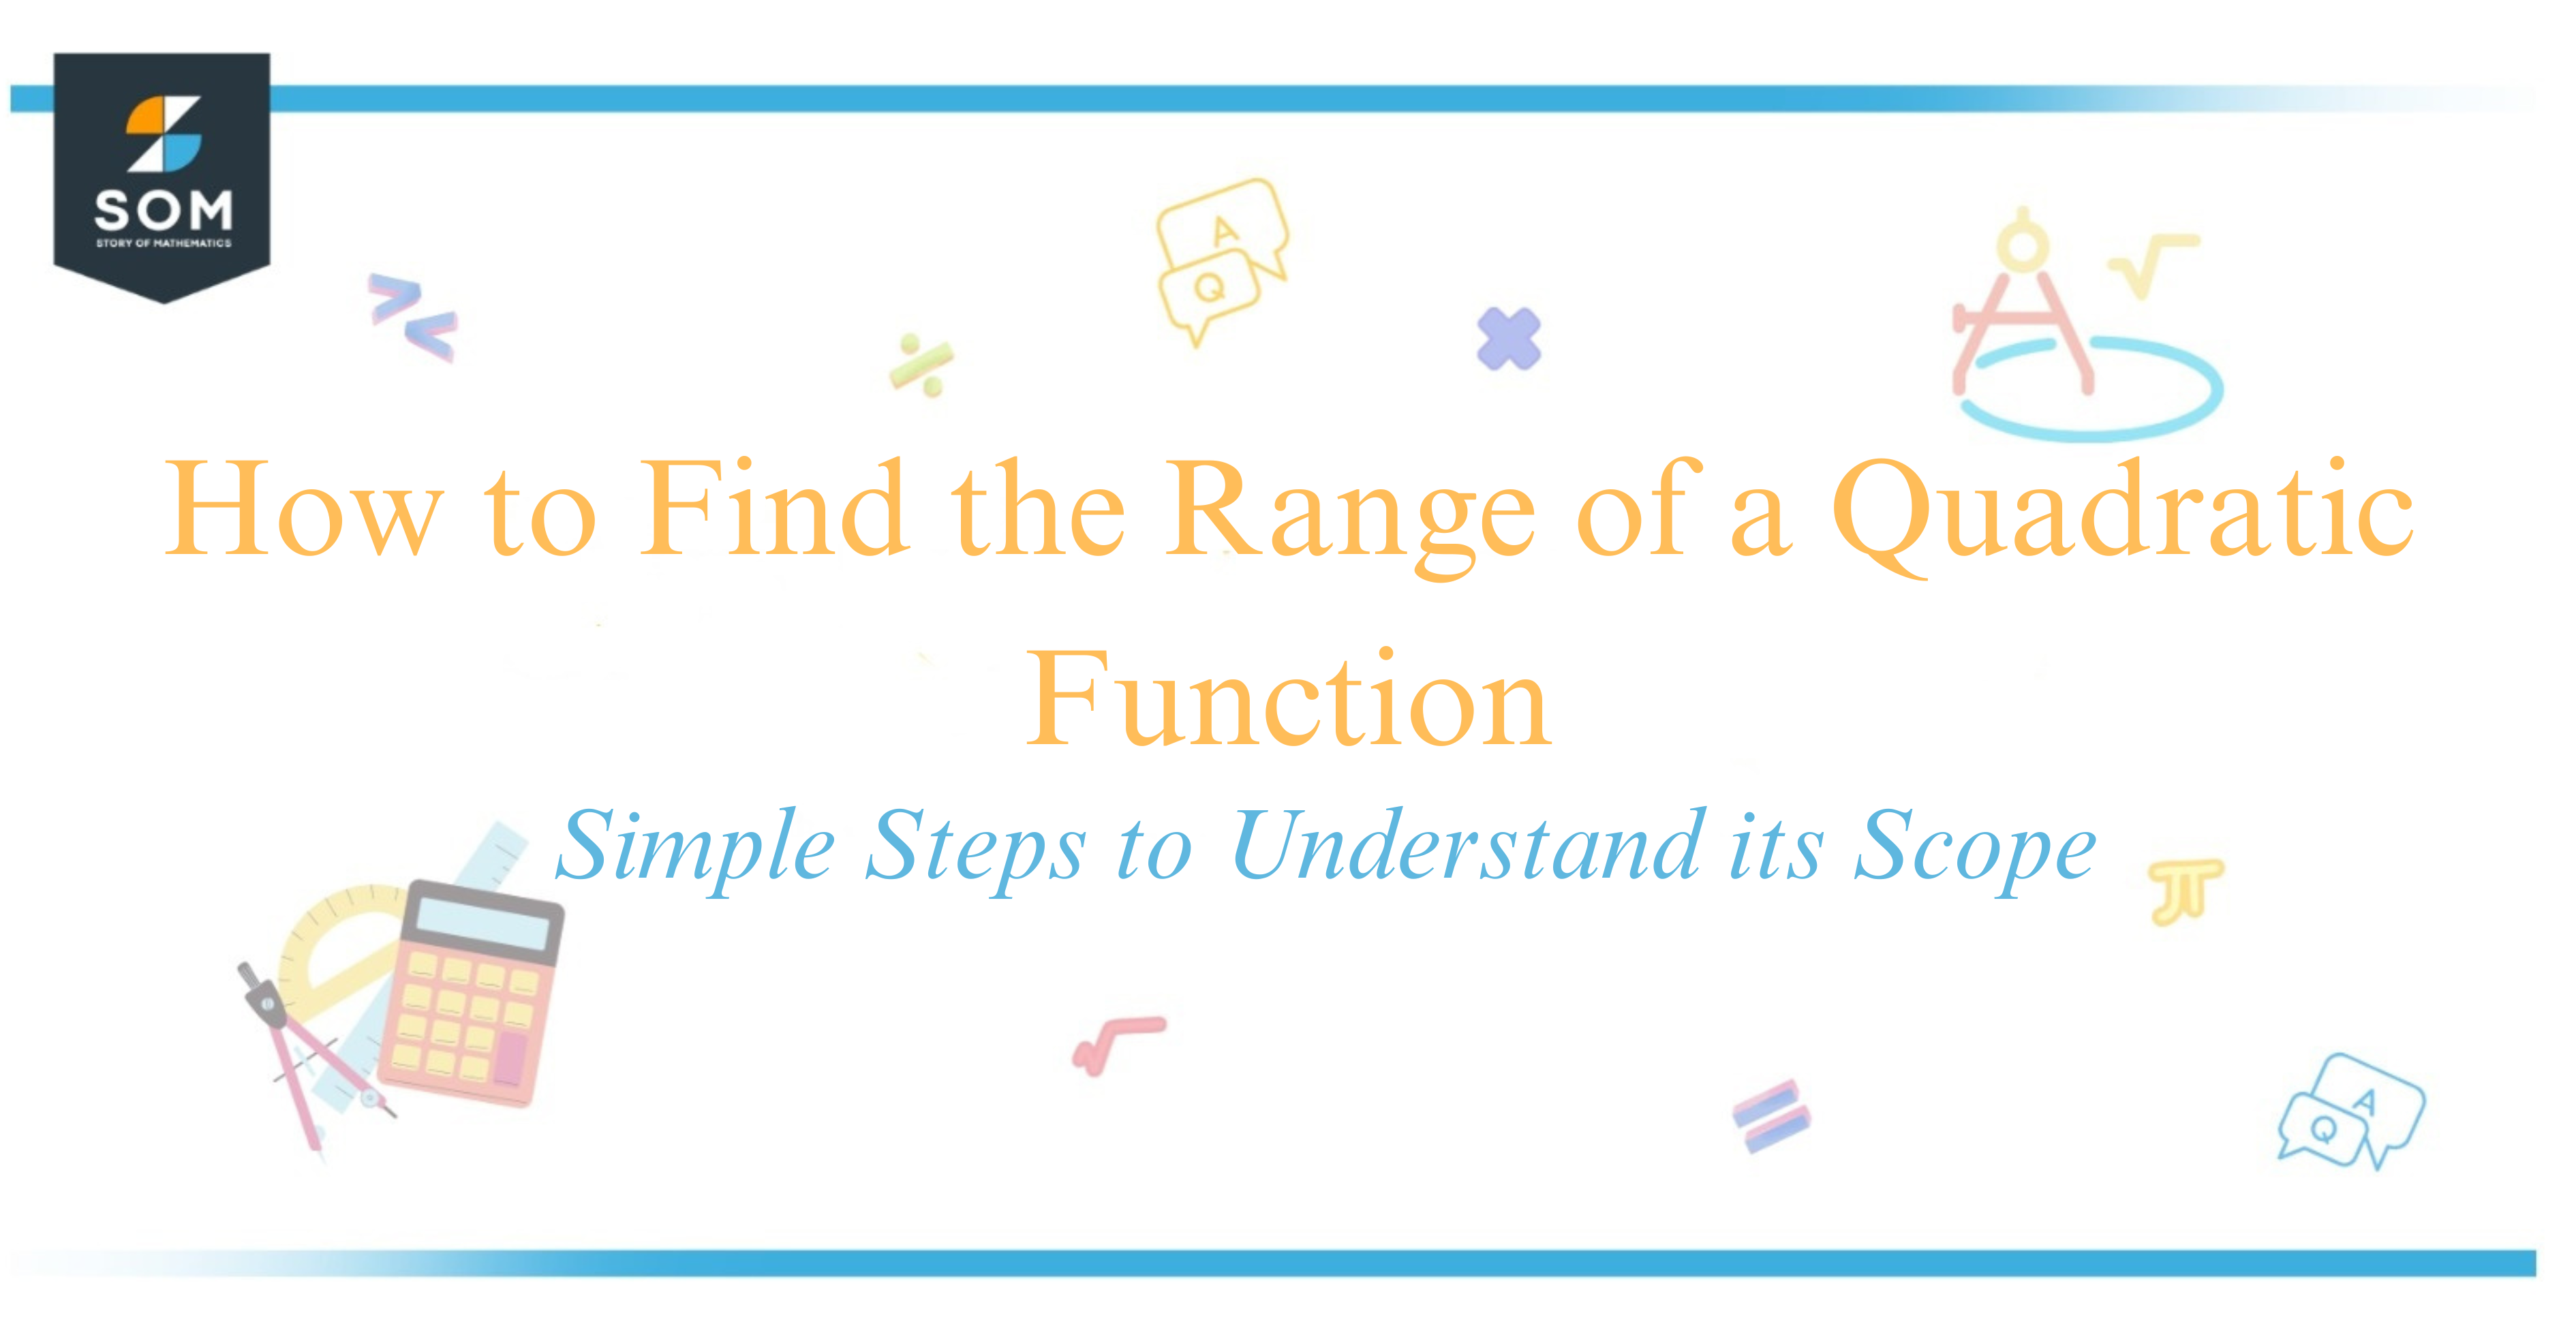 How to Find the Range of a Quadratic Function Simple Steps to Understand its Scope